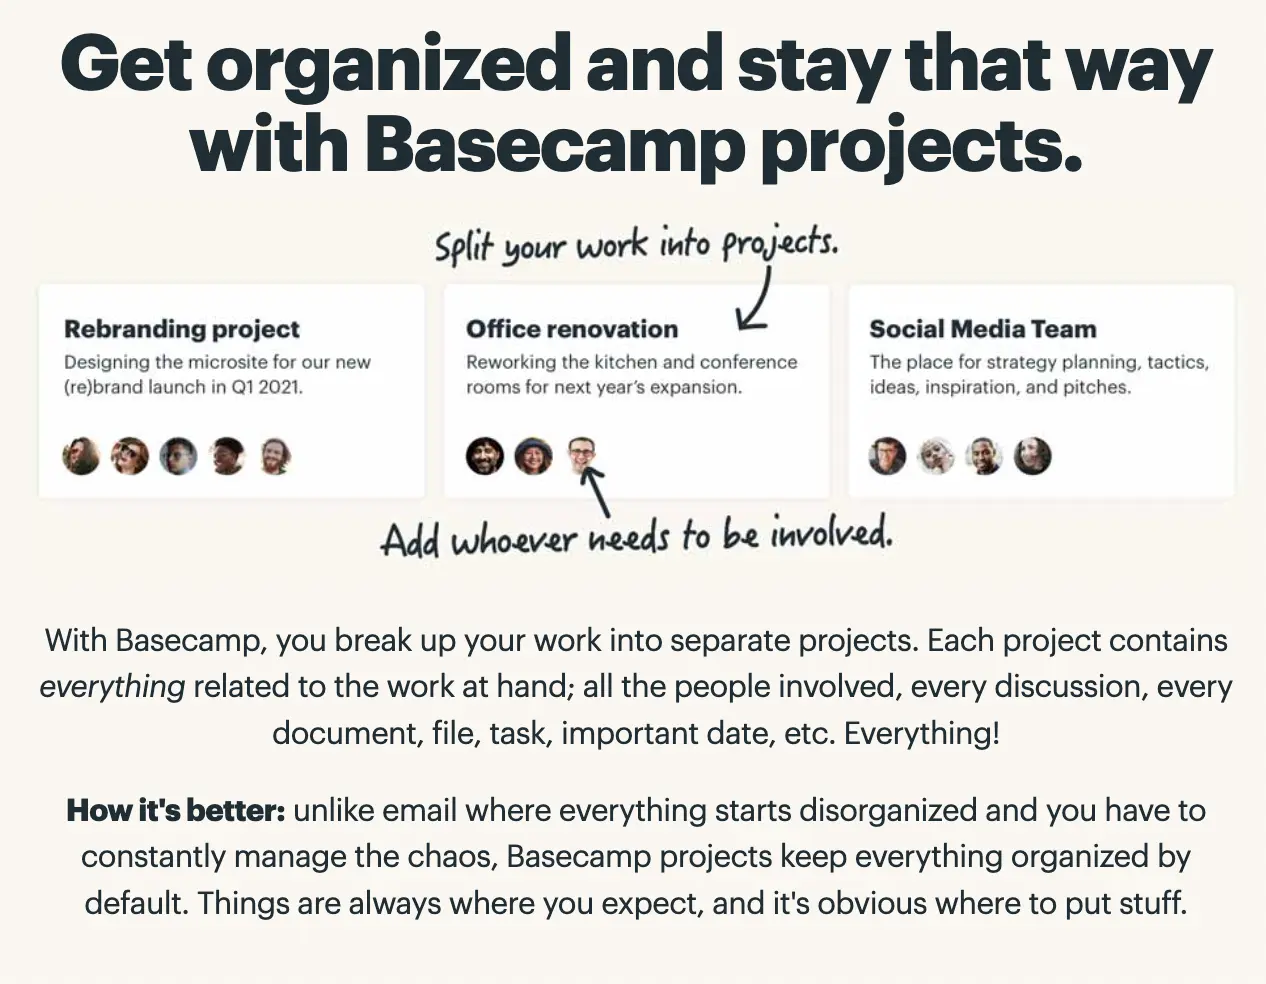 What Makes Basecamp Different?